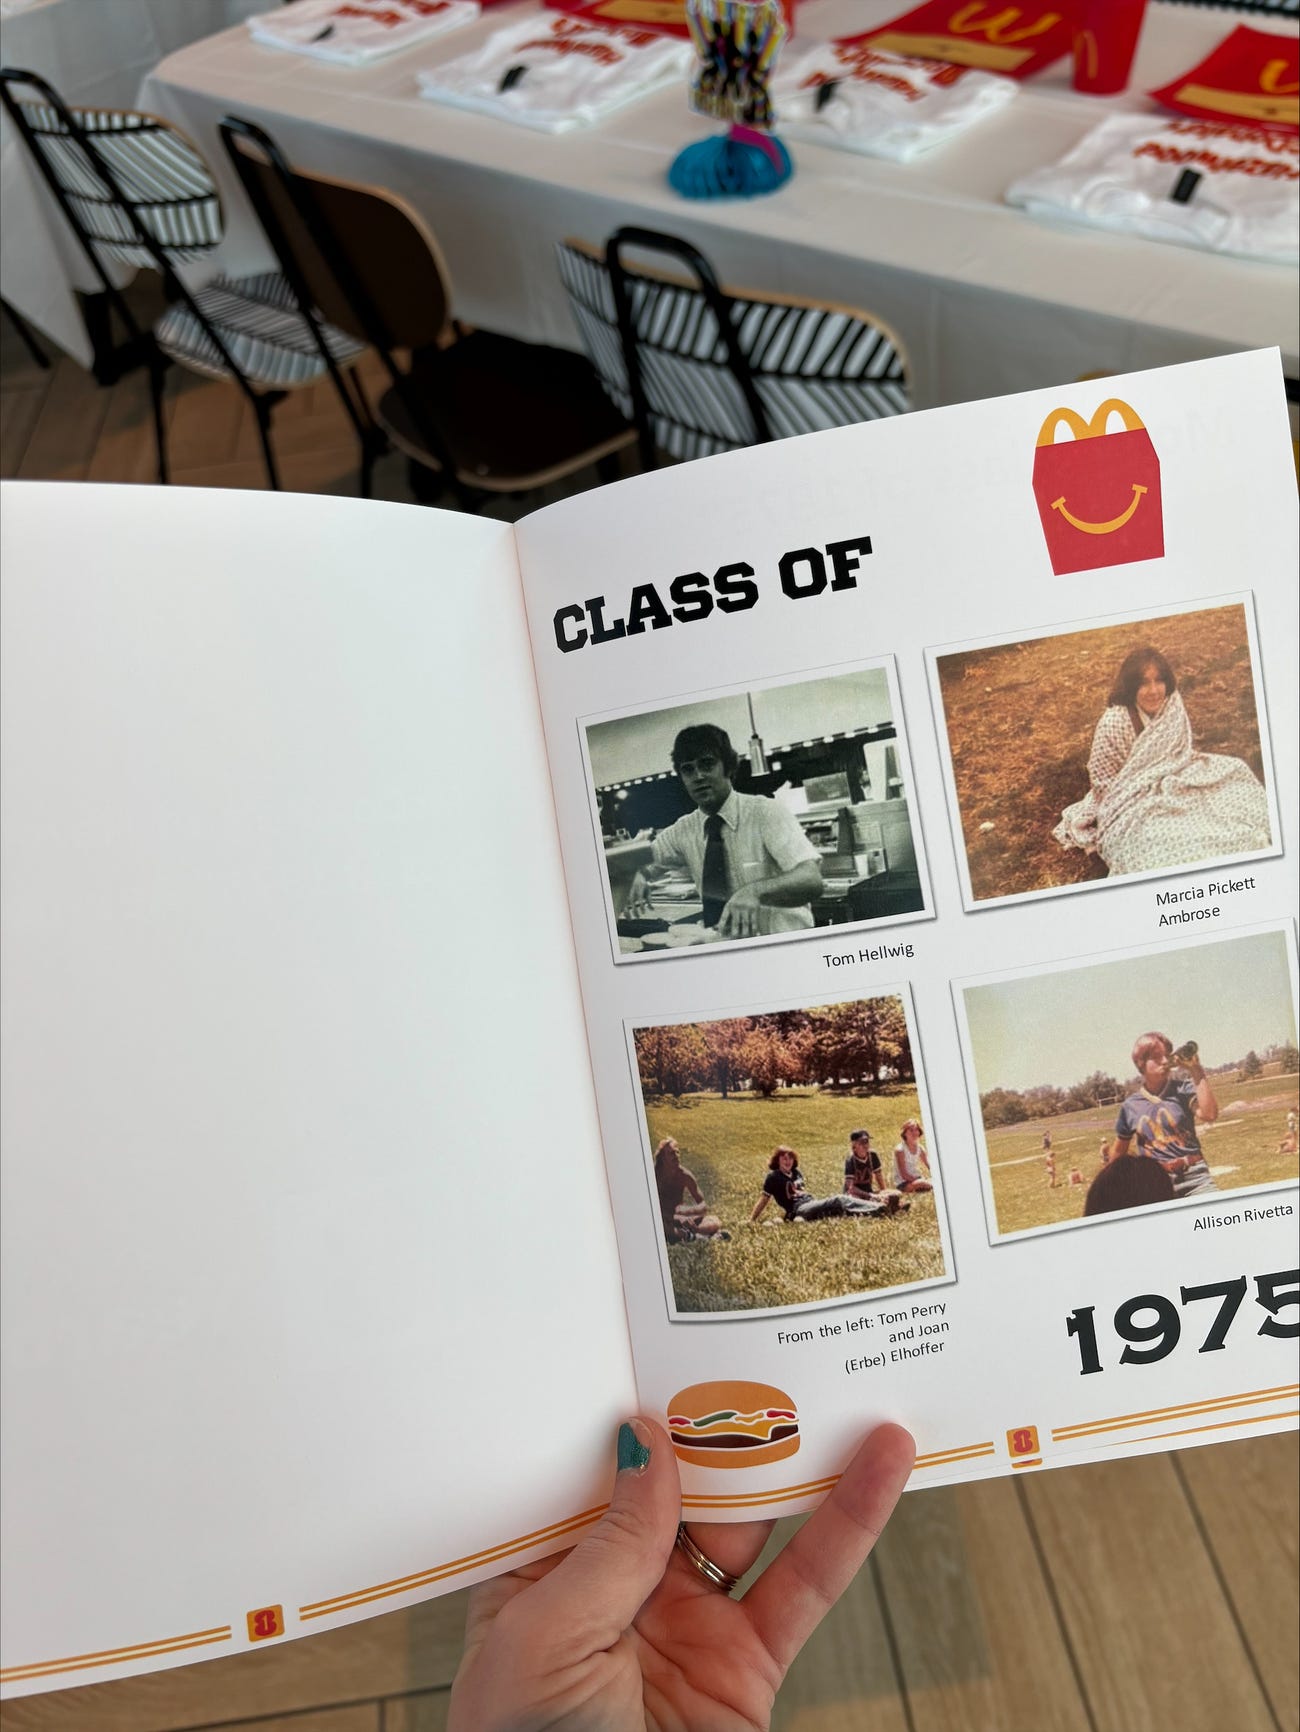 A photo of a yearbook made by former McDonald's workers